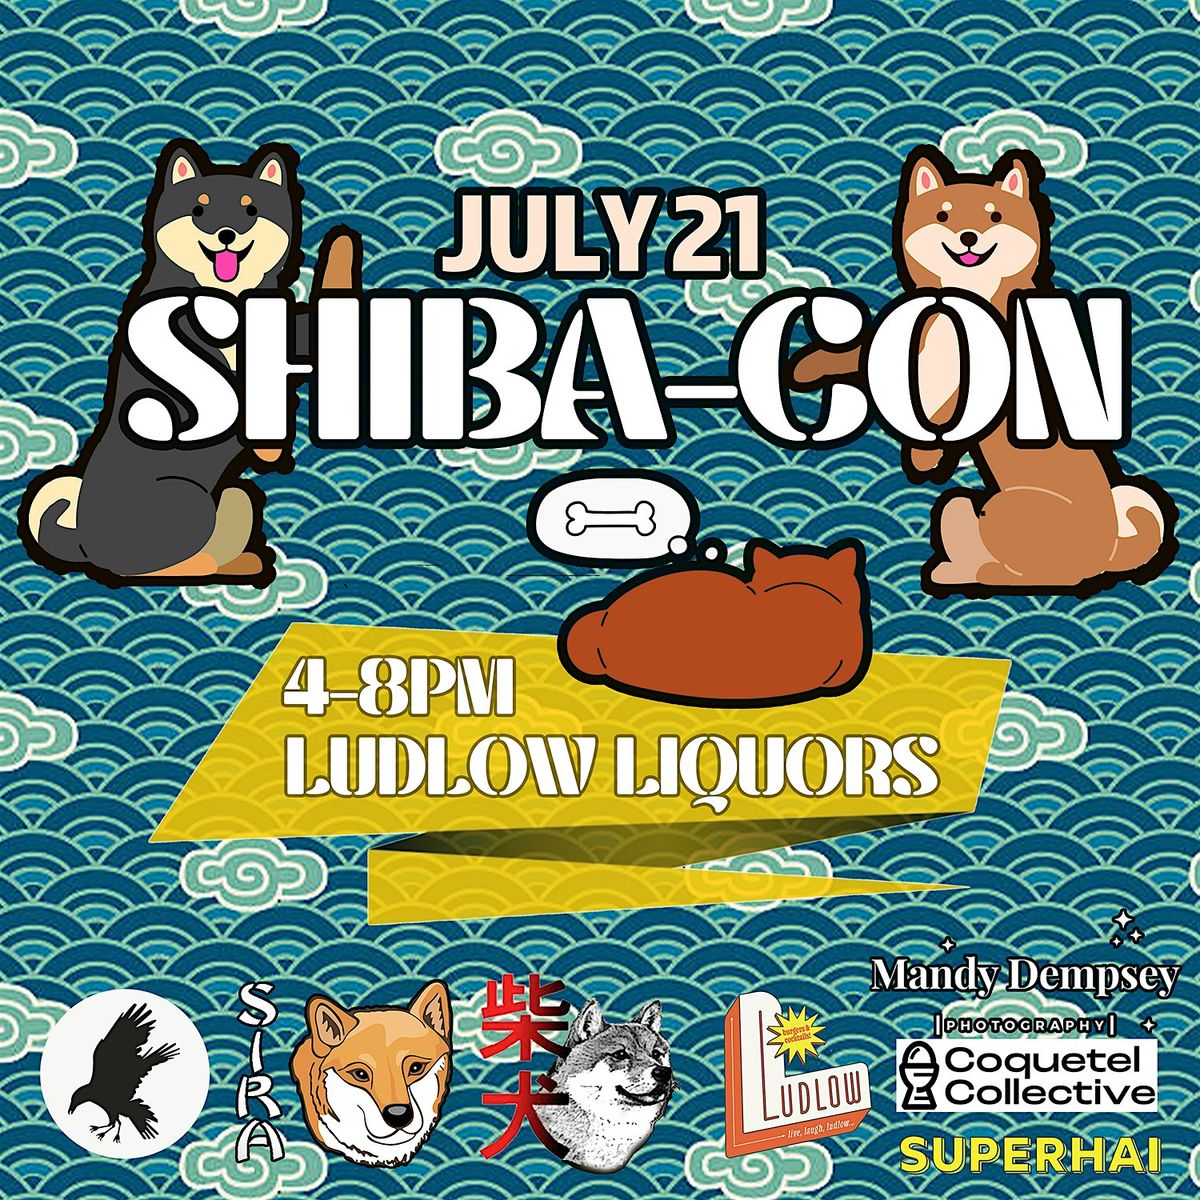 SHIBA-CON Presented by the Japanese Arts Foundation